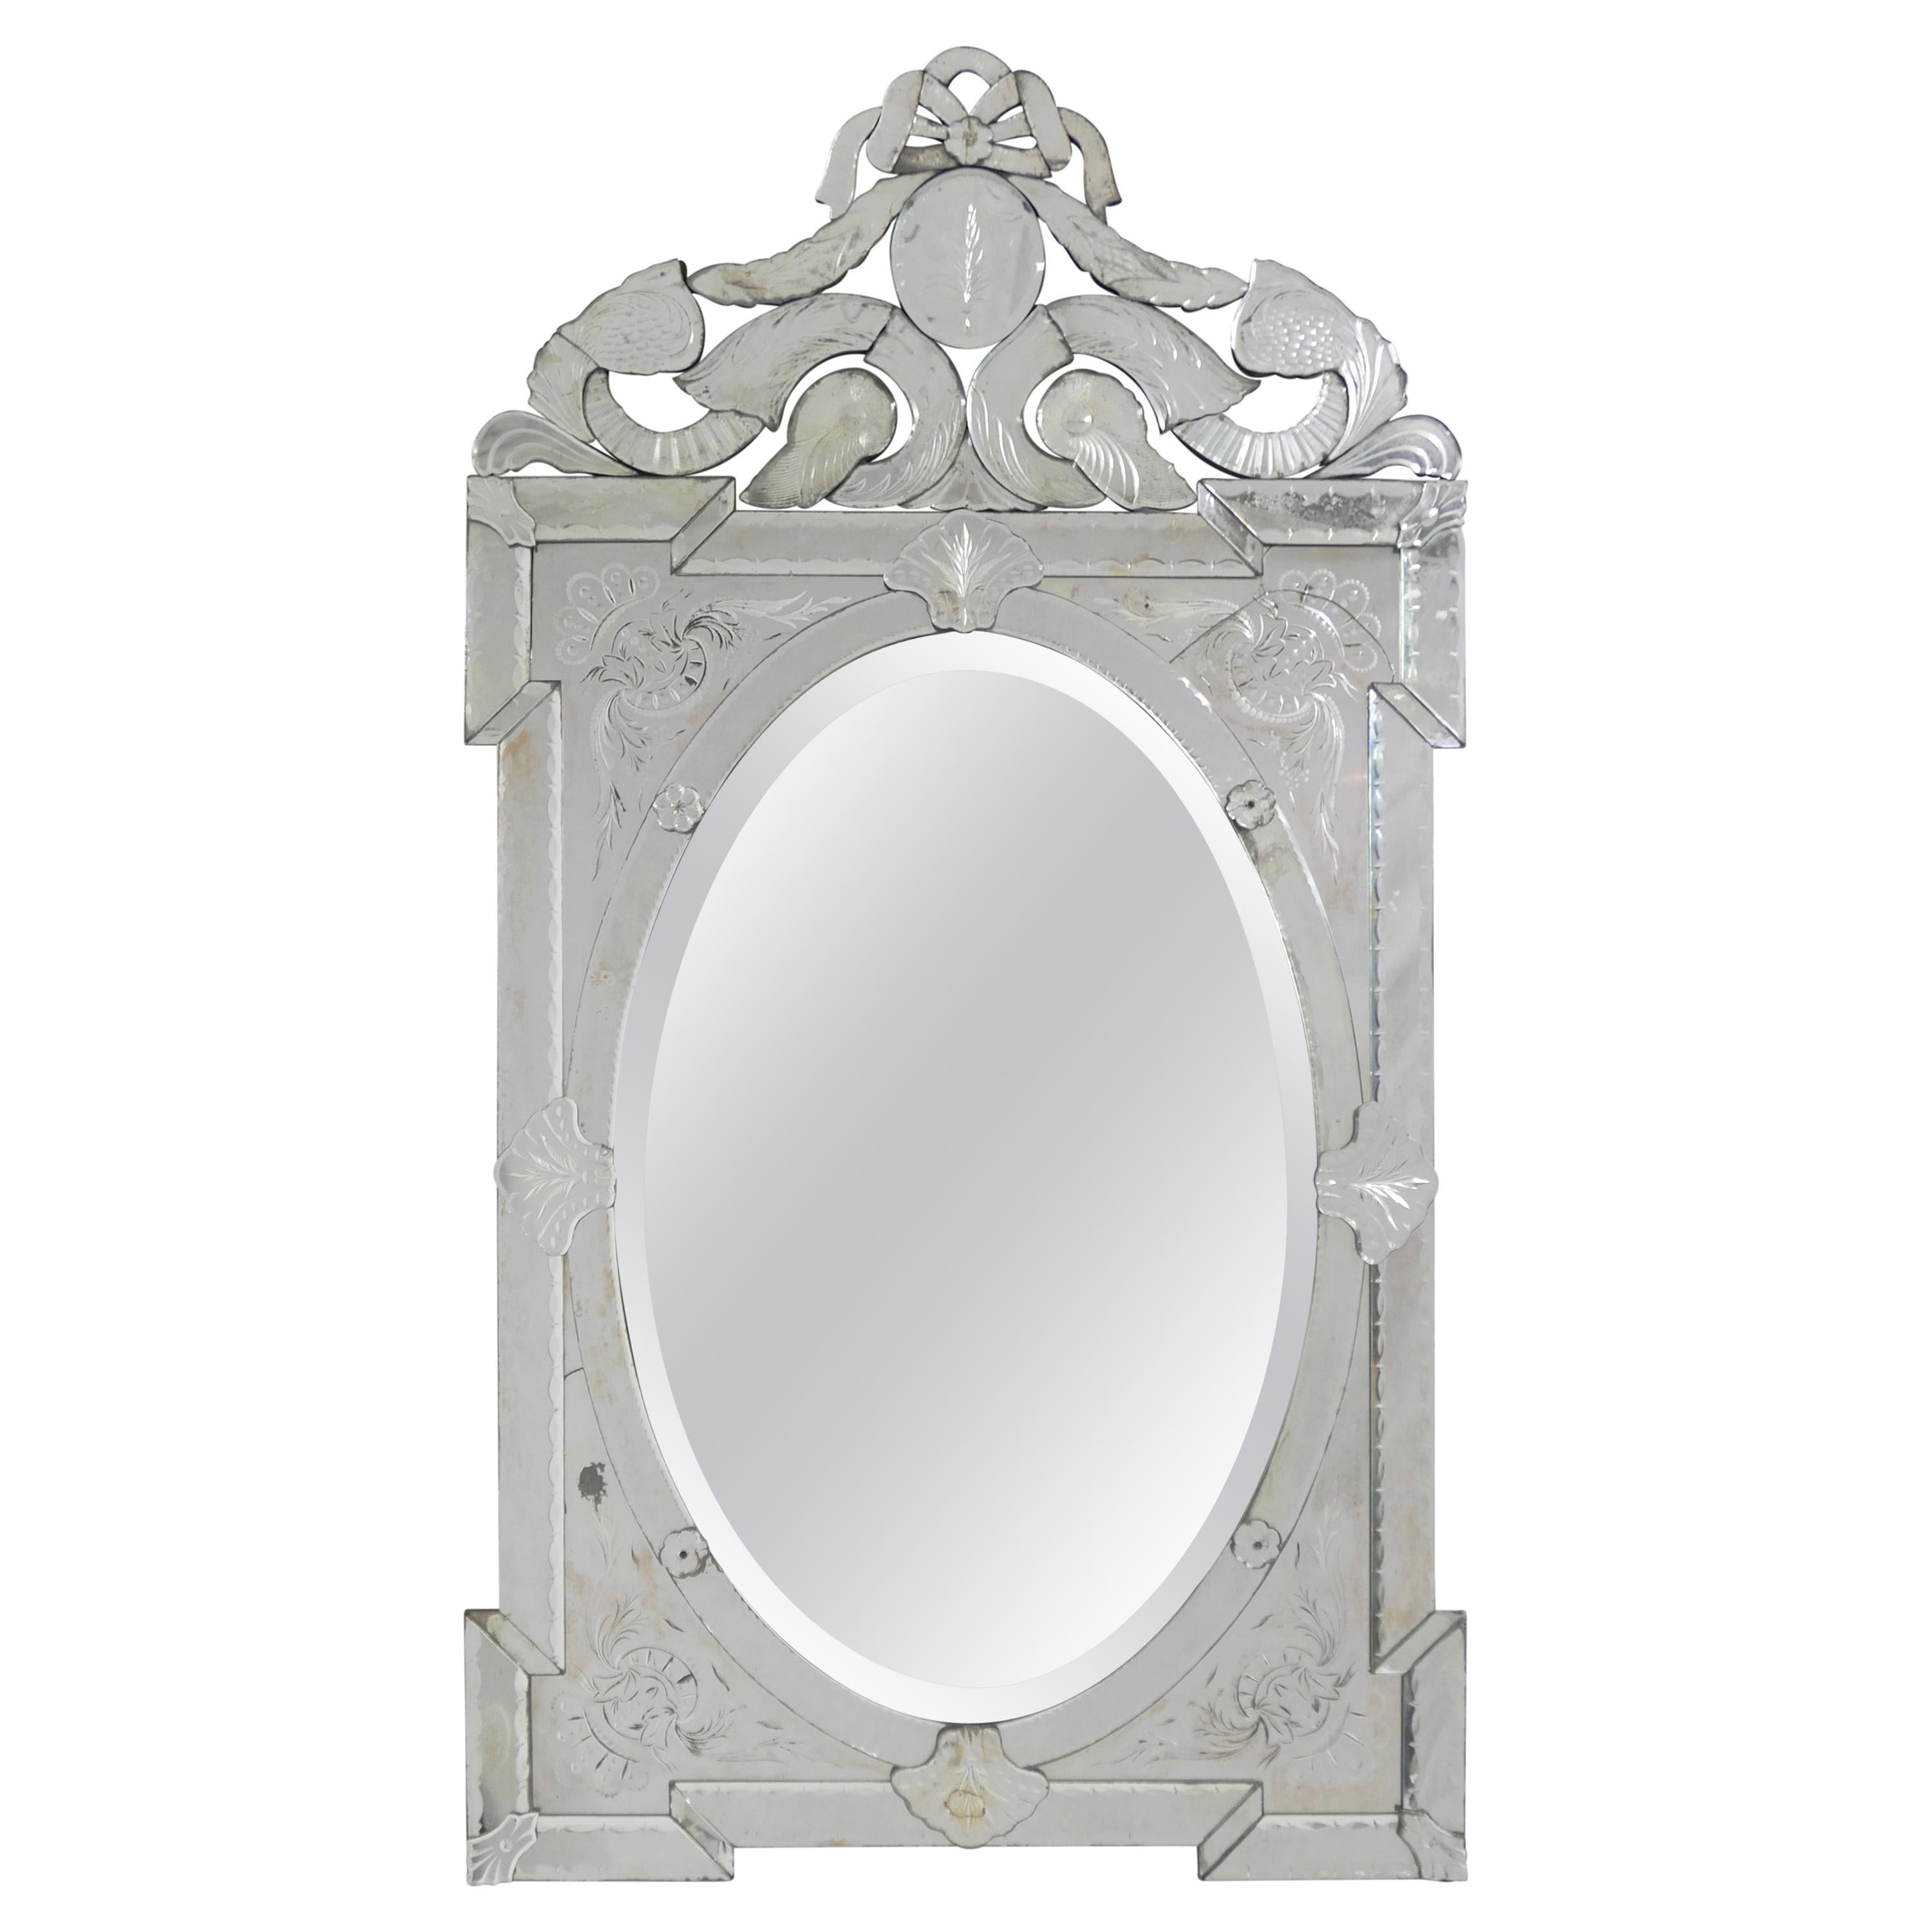 Venetian Pier Mirror with Etched Panels, Italian, 19th Century